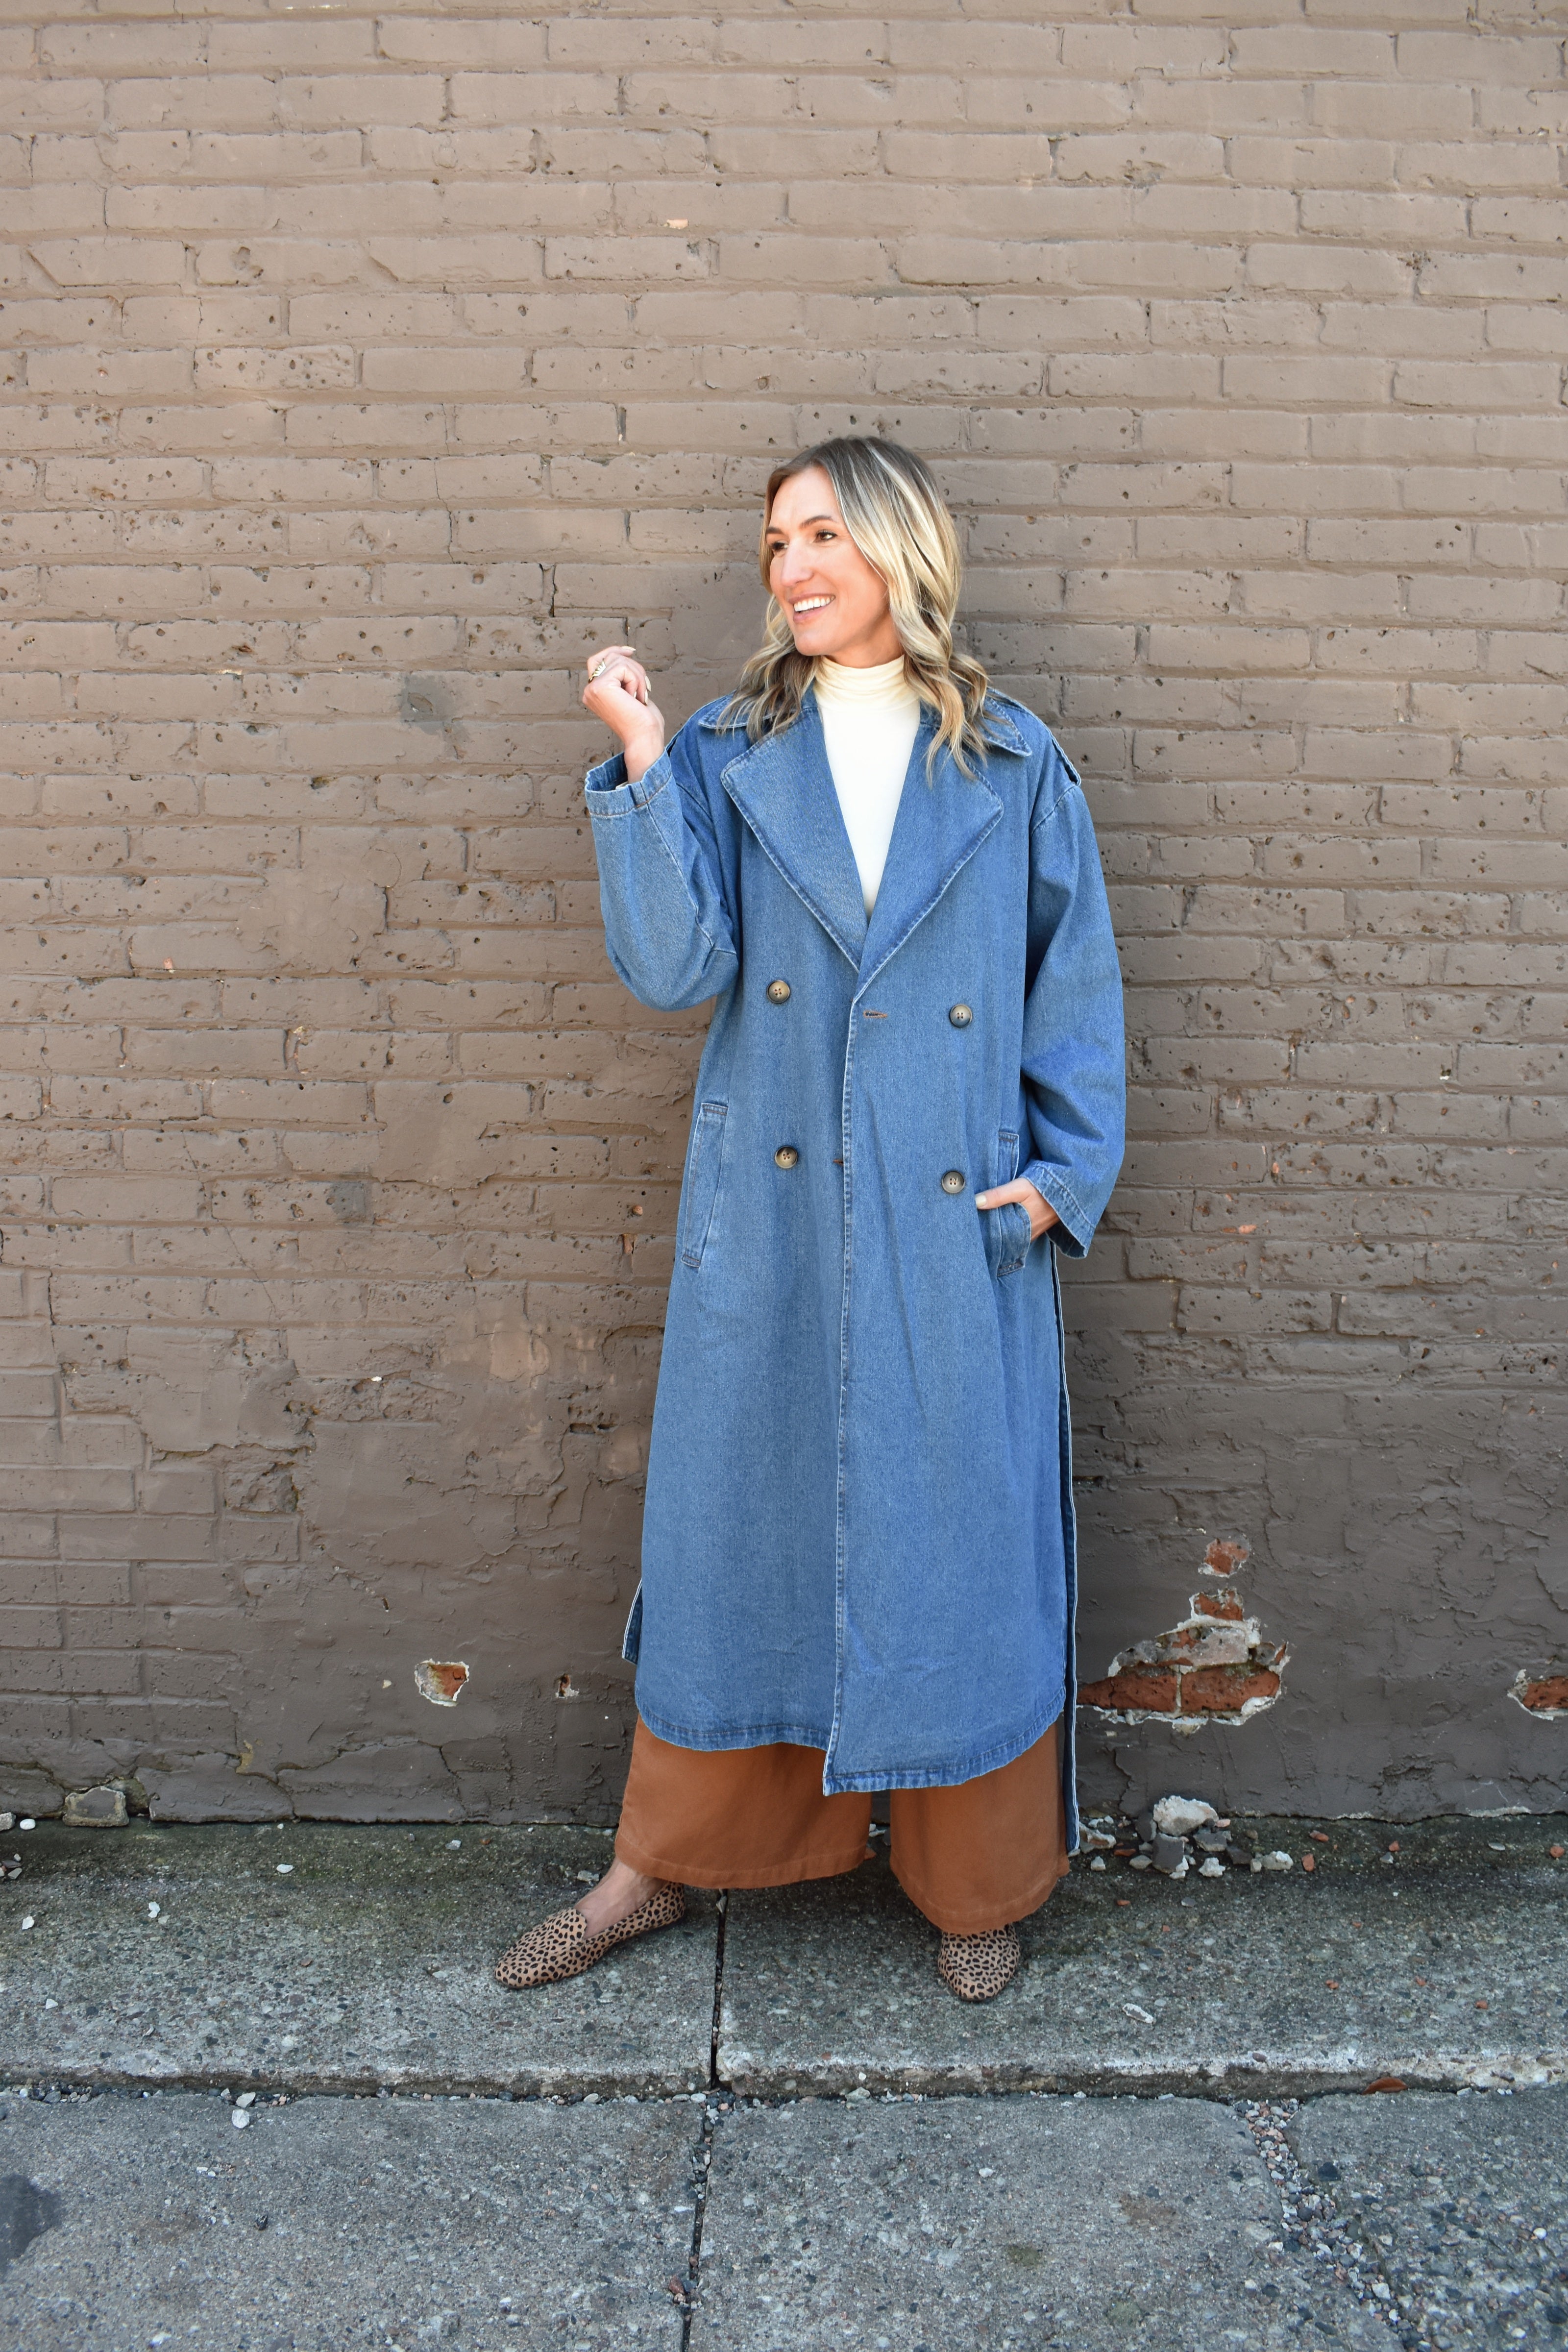 NYDJ Modern Edit Denim Jeans Collection » MILLENNIELLE | Coat, Trench coat  outfit, Stylish coat